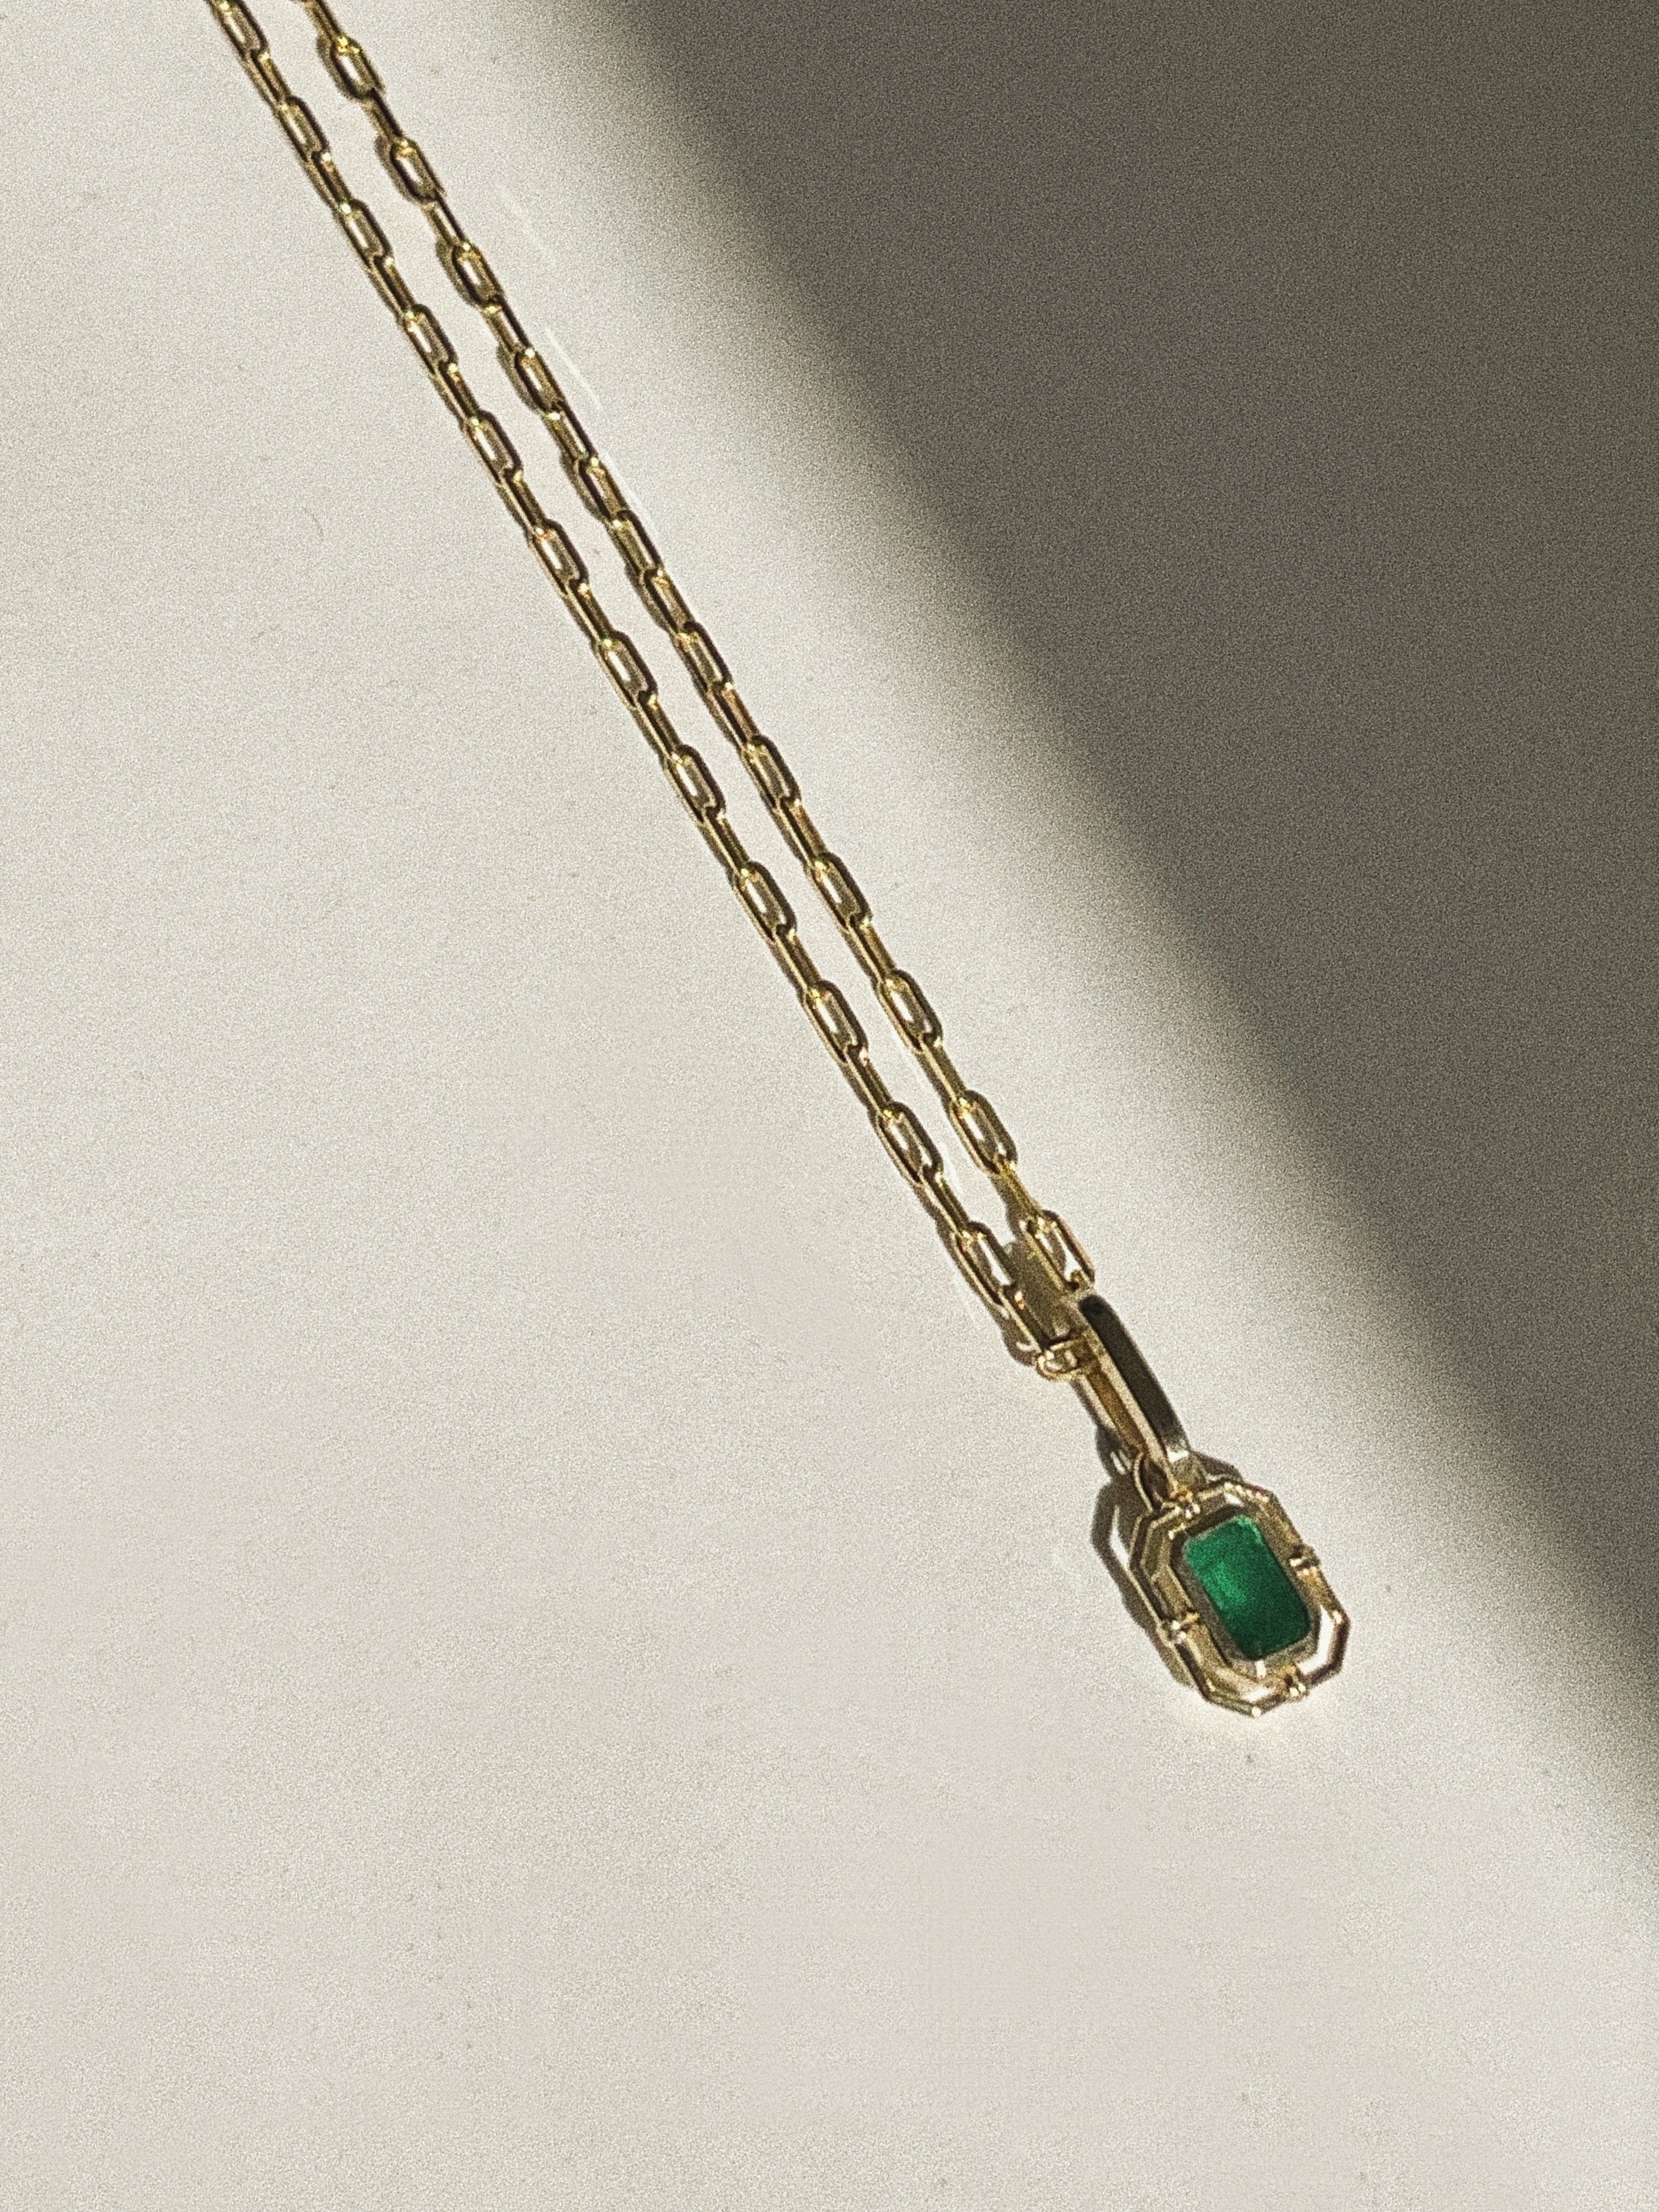 alt="Lyra Baguette Pendant I - Emerald with pico link chain"